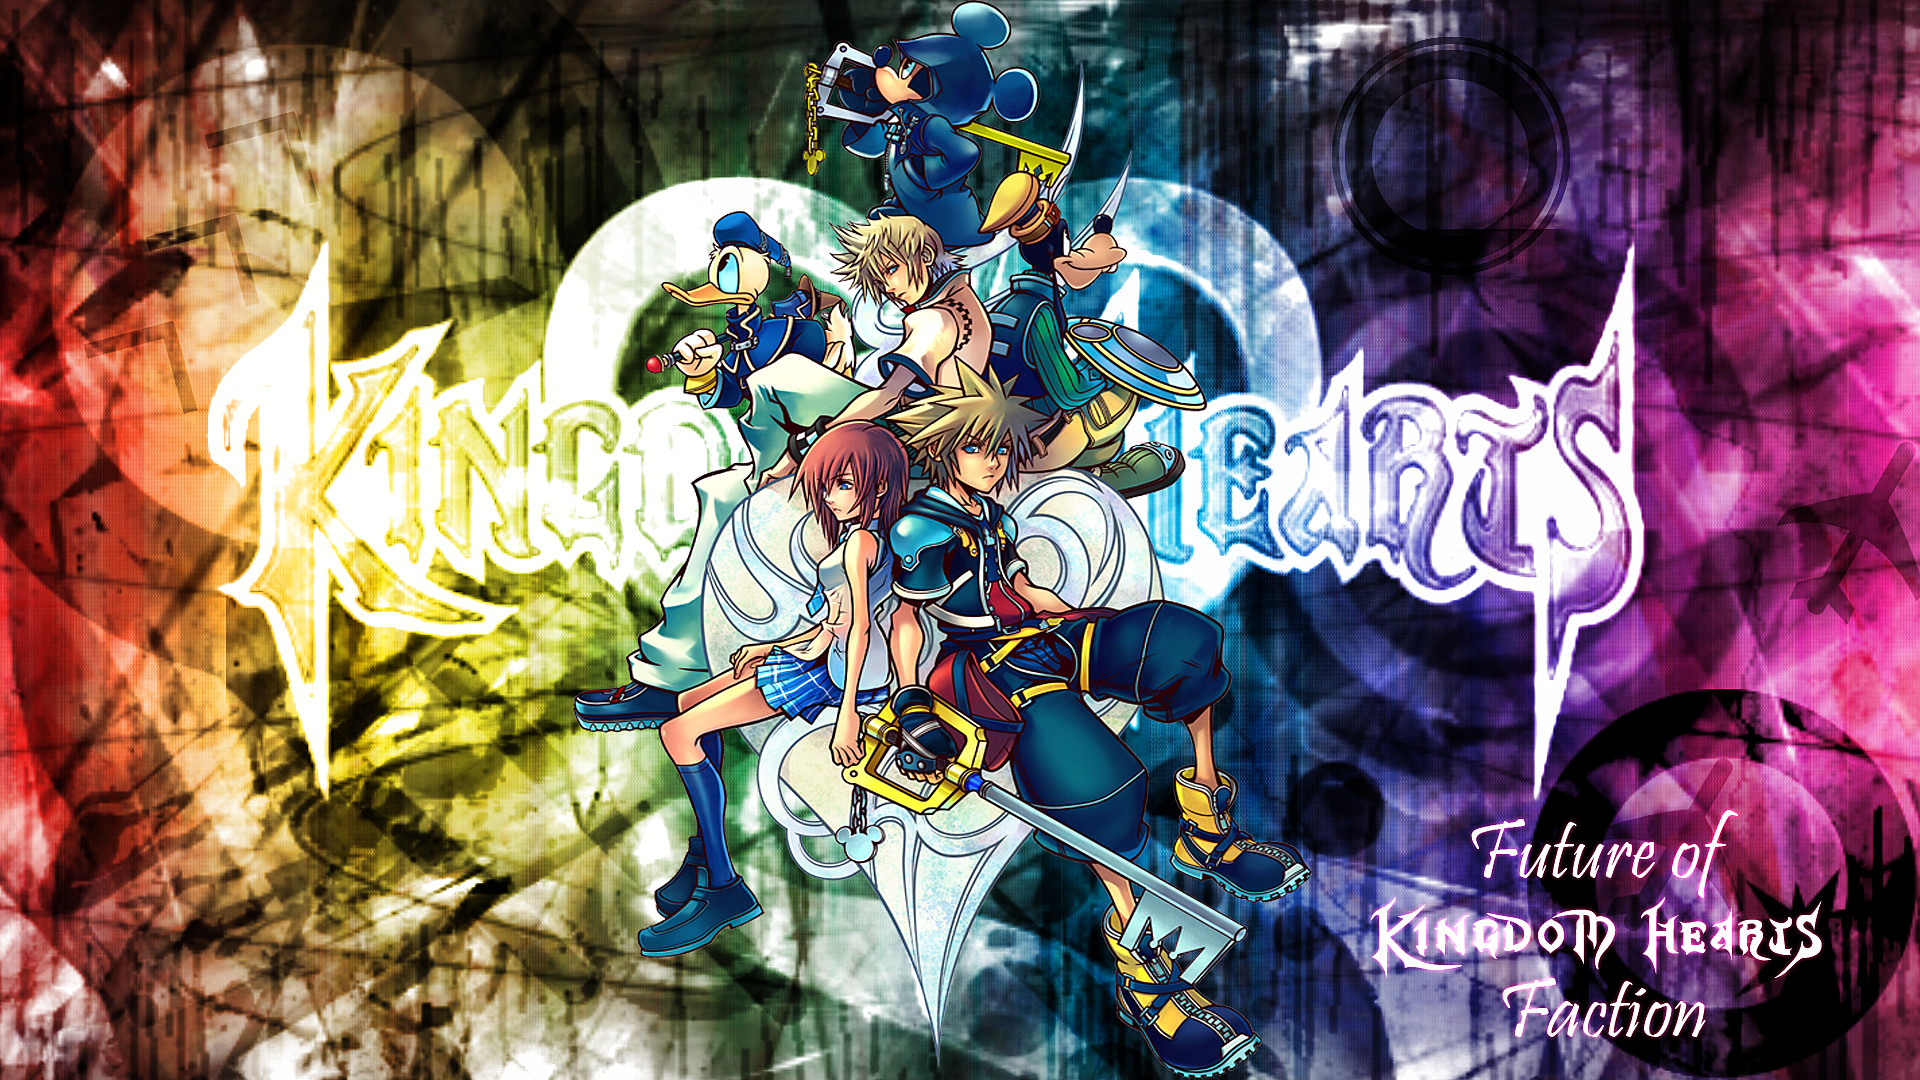 1920x1080 about Kingdom Hearts 2 ! or even, videos related to Kingdom Hearts .